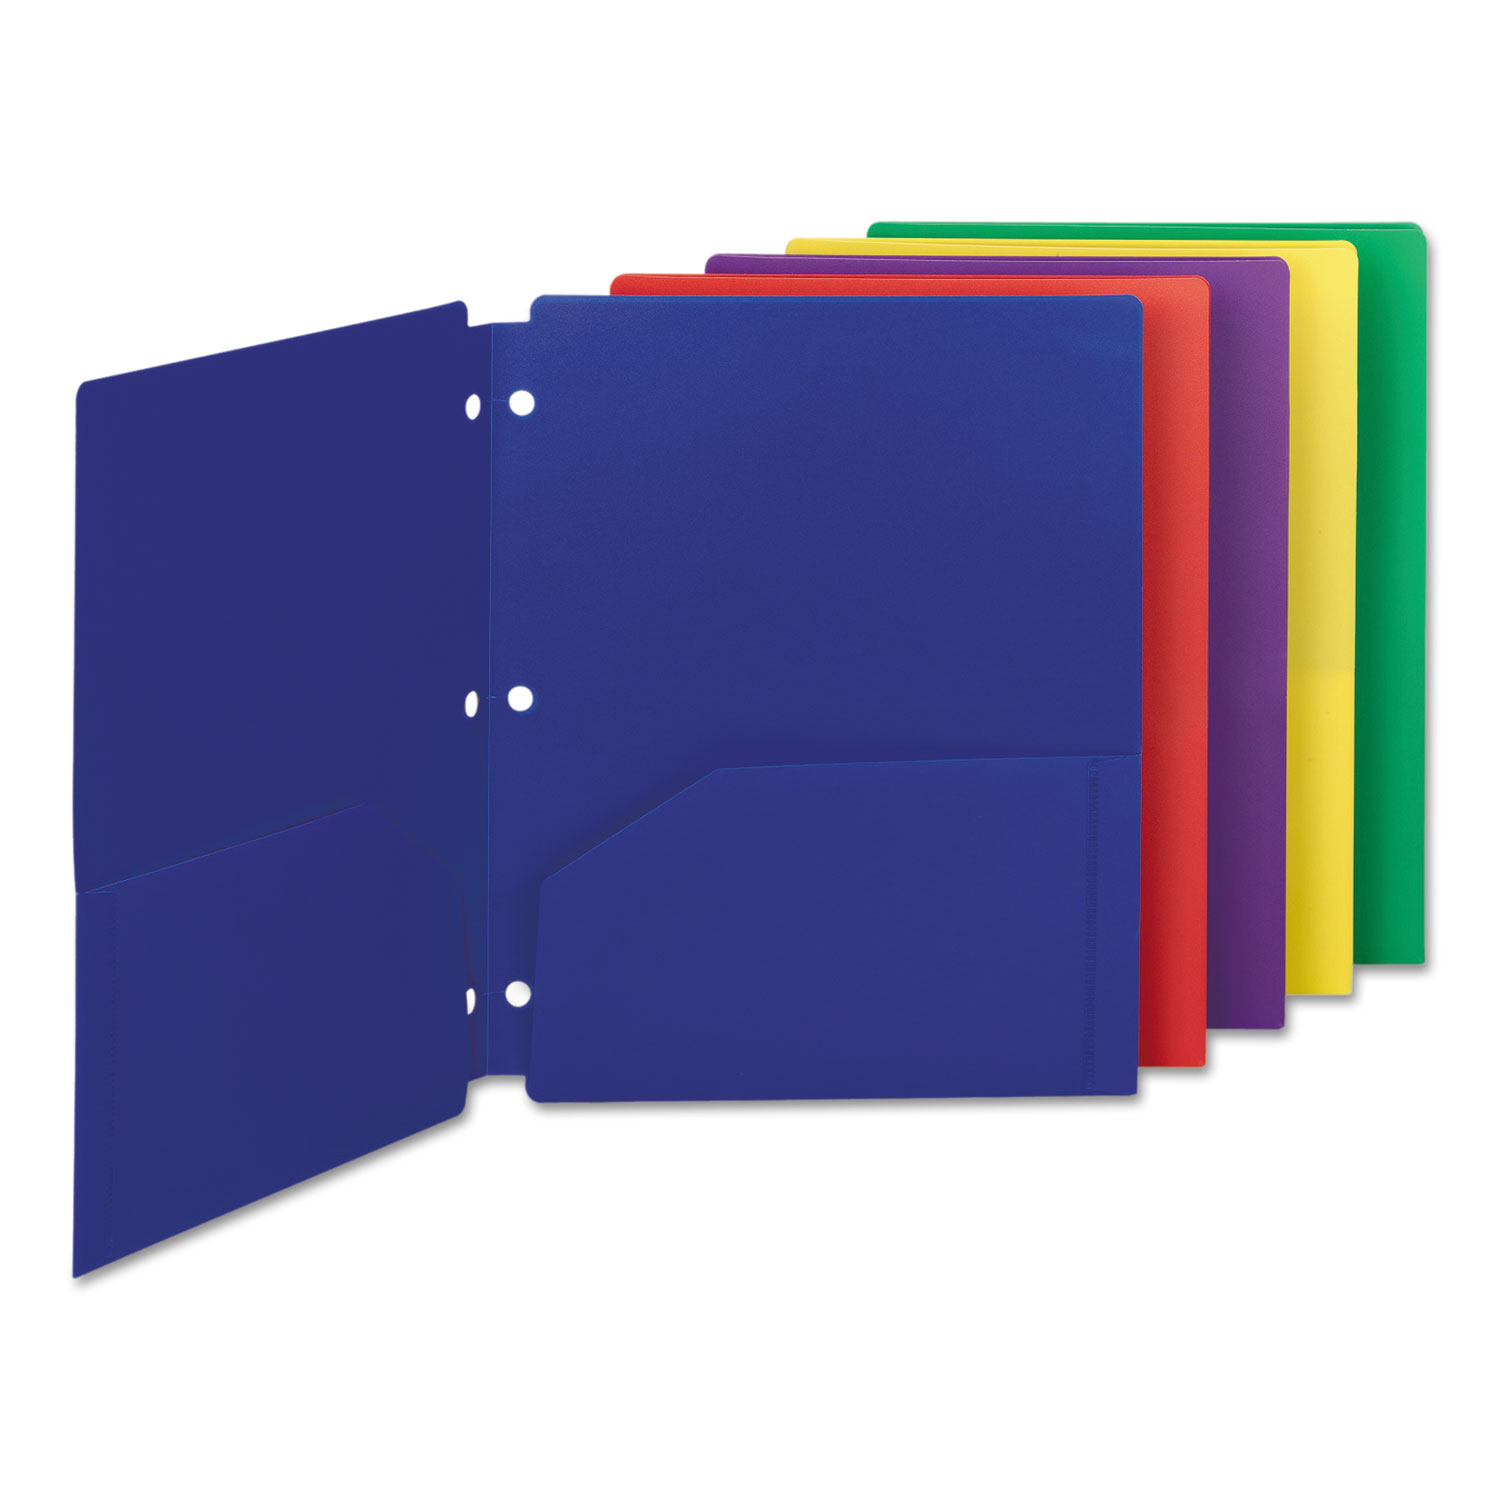  Smead 87939 Poly Snap-In Two-Pocket Folder, 11 x 8 1/2, Assorted, 10/Pack (SMD87939) 